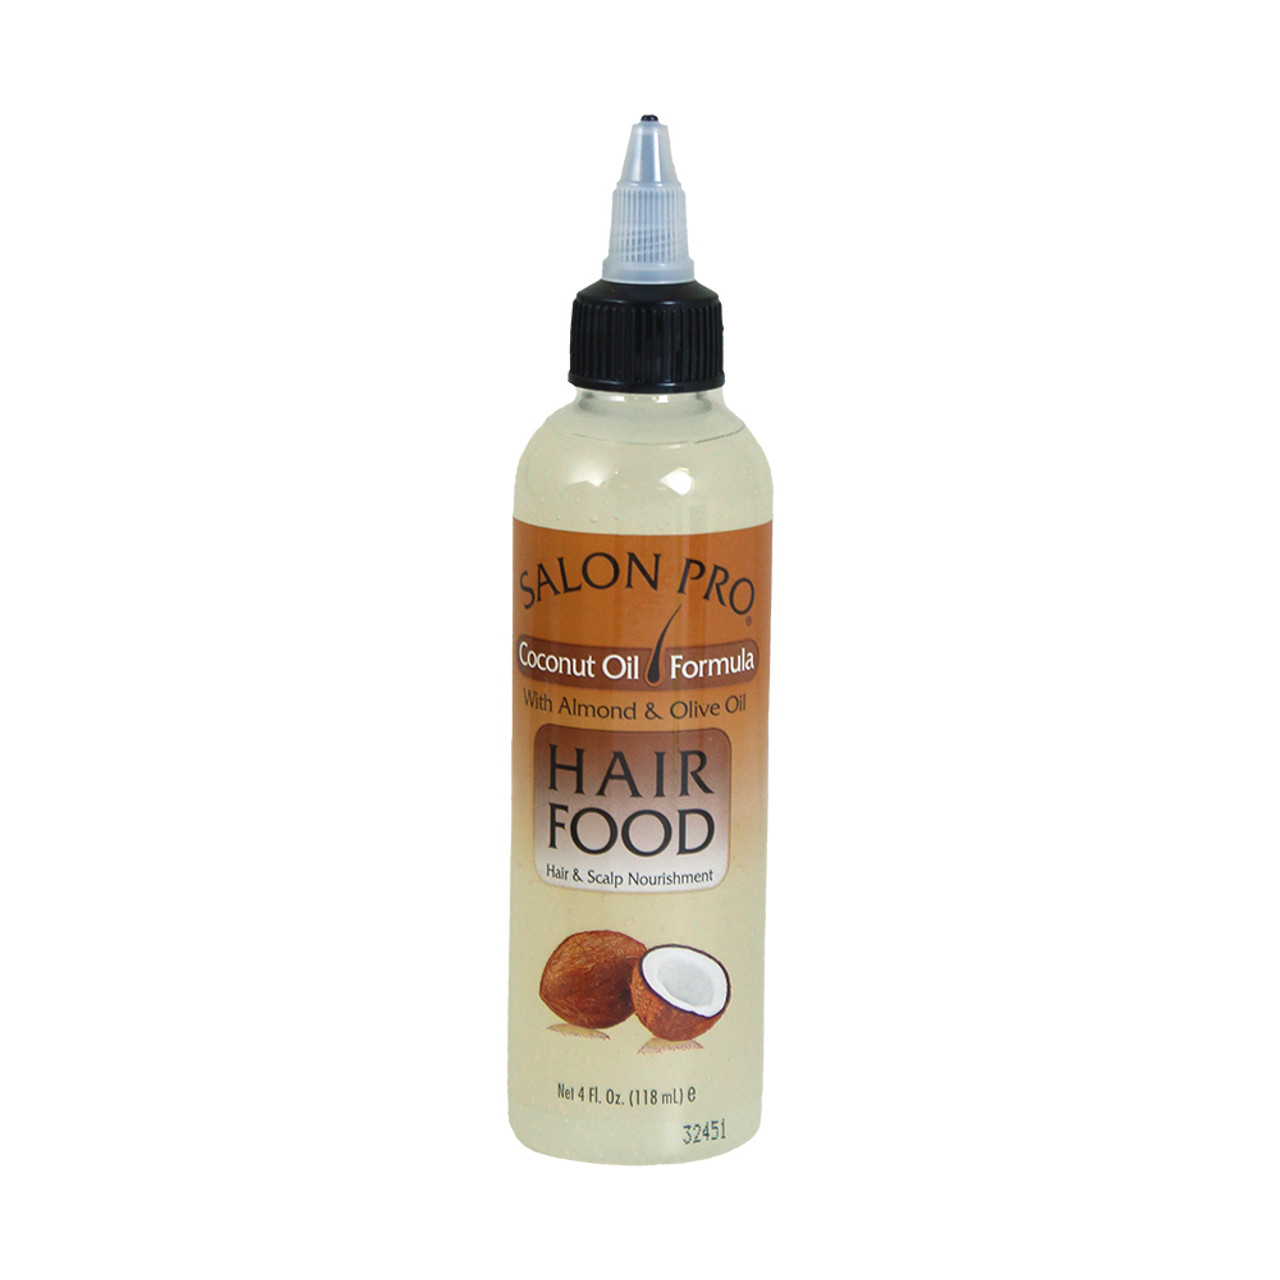 Salon Pro Coconut Oil Hair Food - Hair Care - African Beauty Products